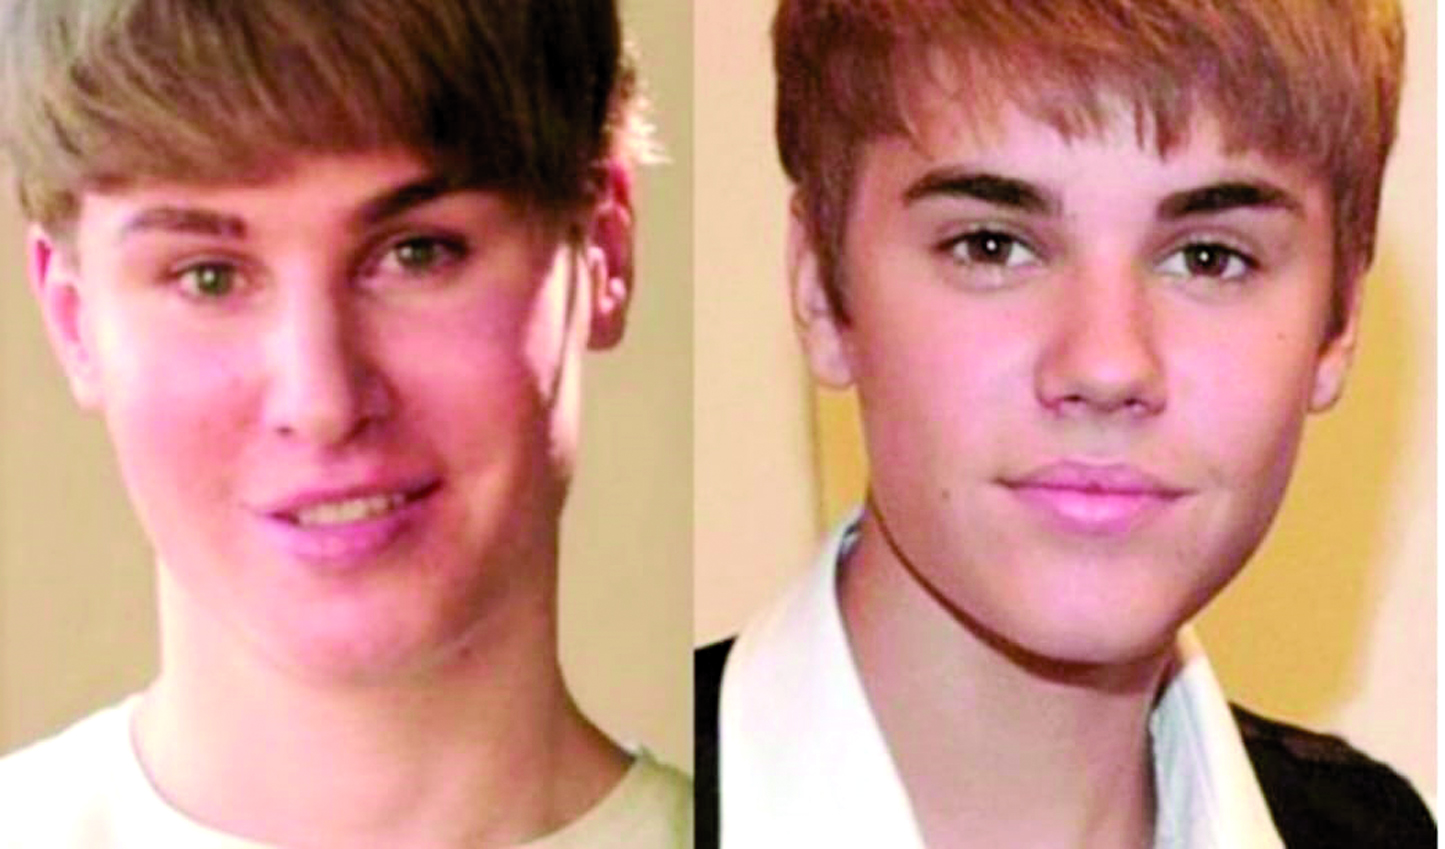 Instead, Toby Sheldon, 33, confessed that he spent $100,000 on plastic surgery to look like Justin Bieber.